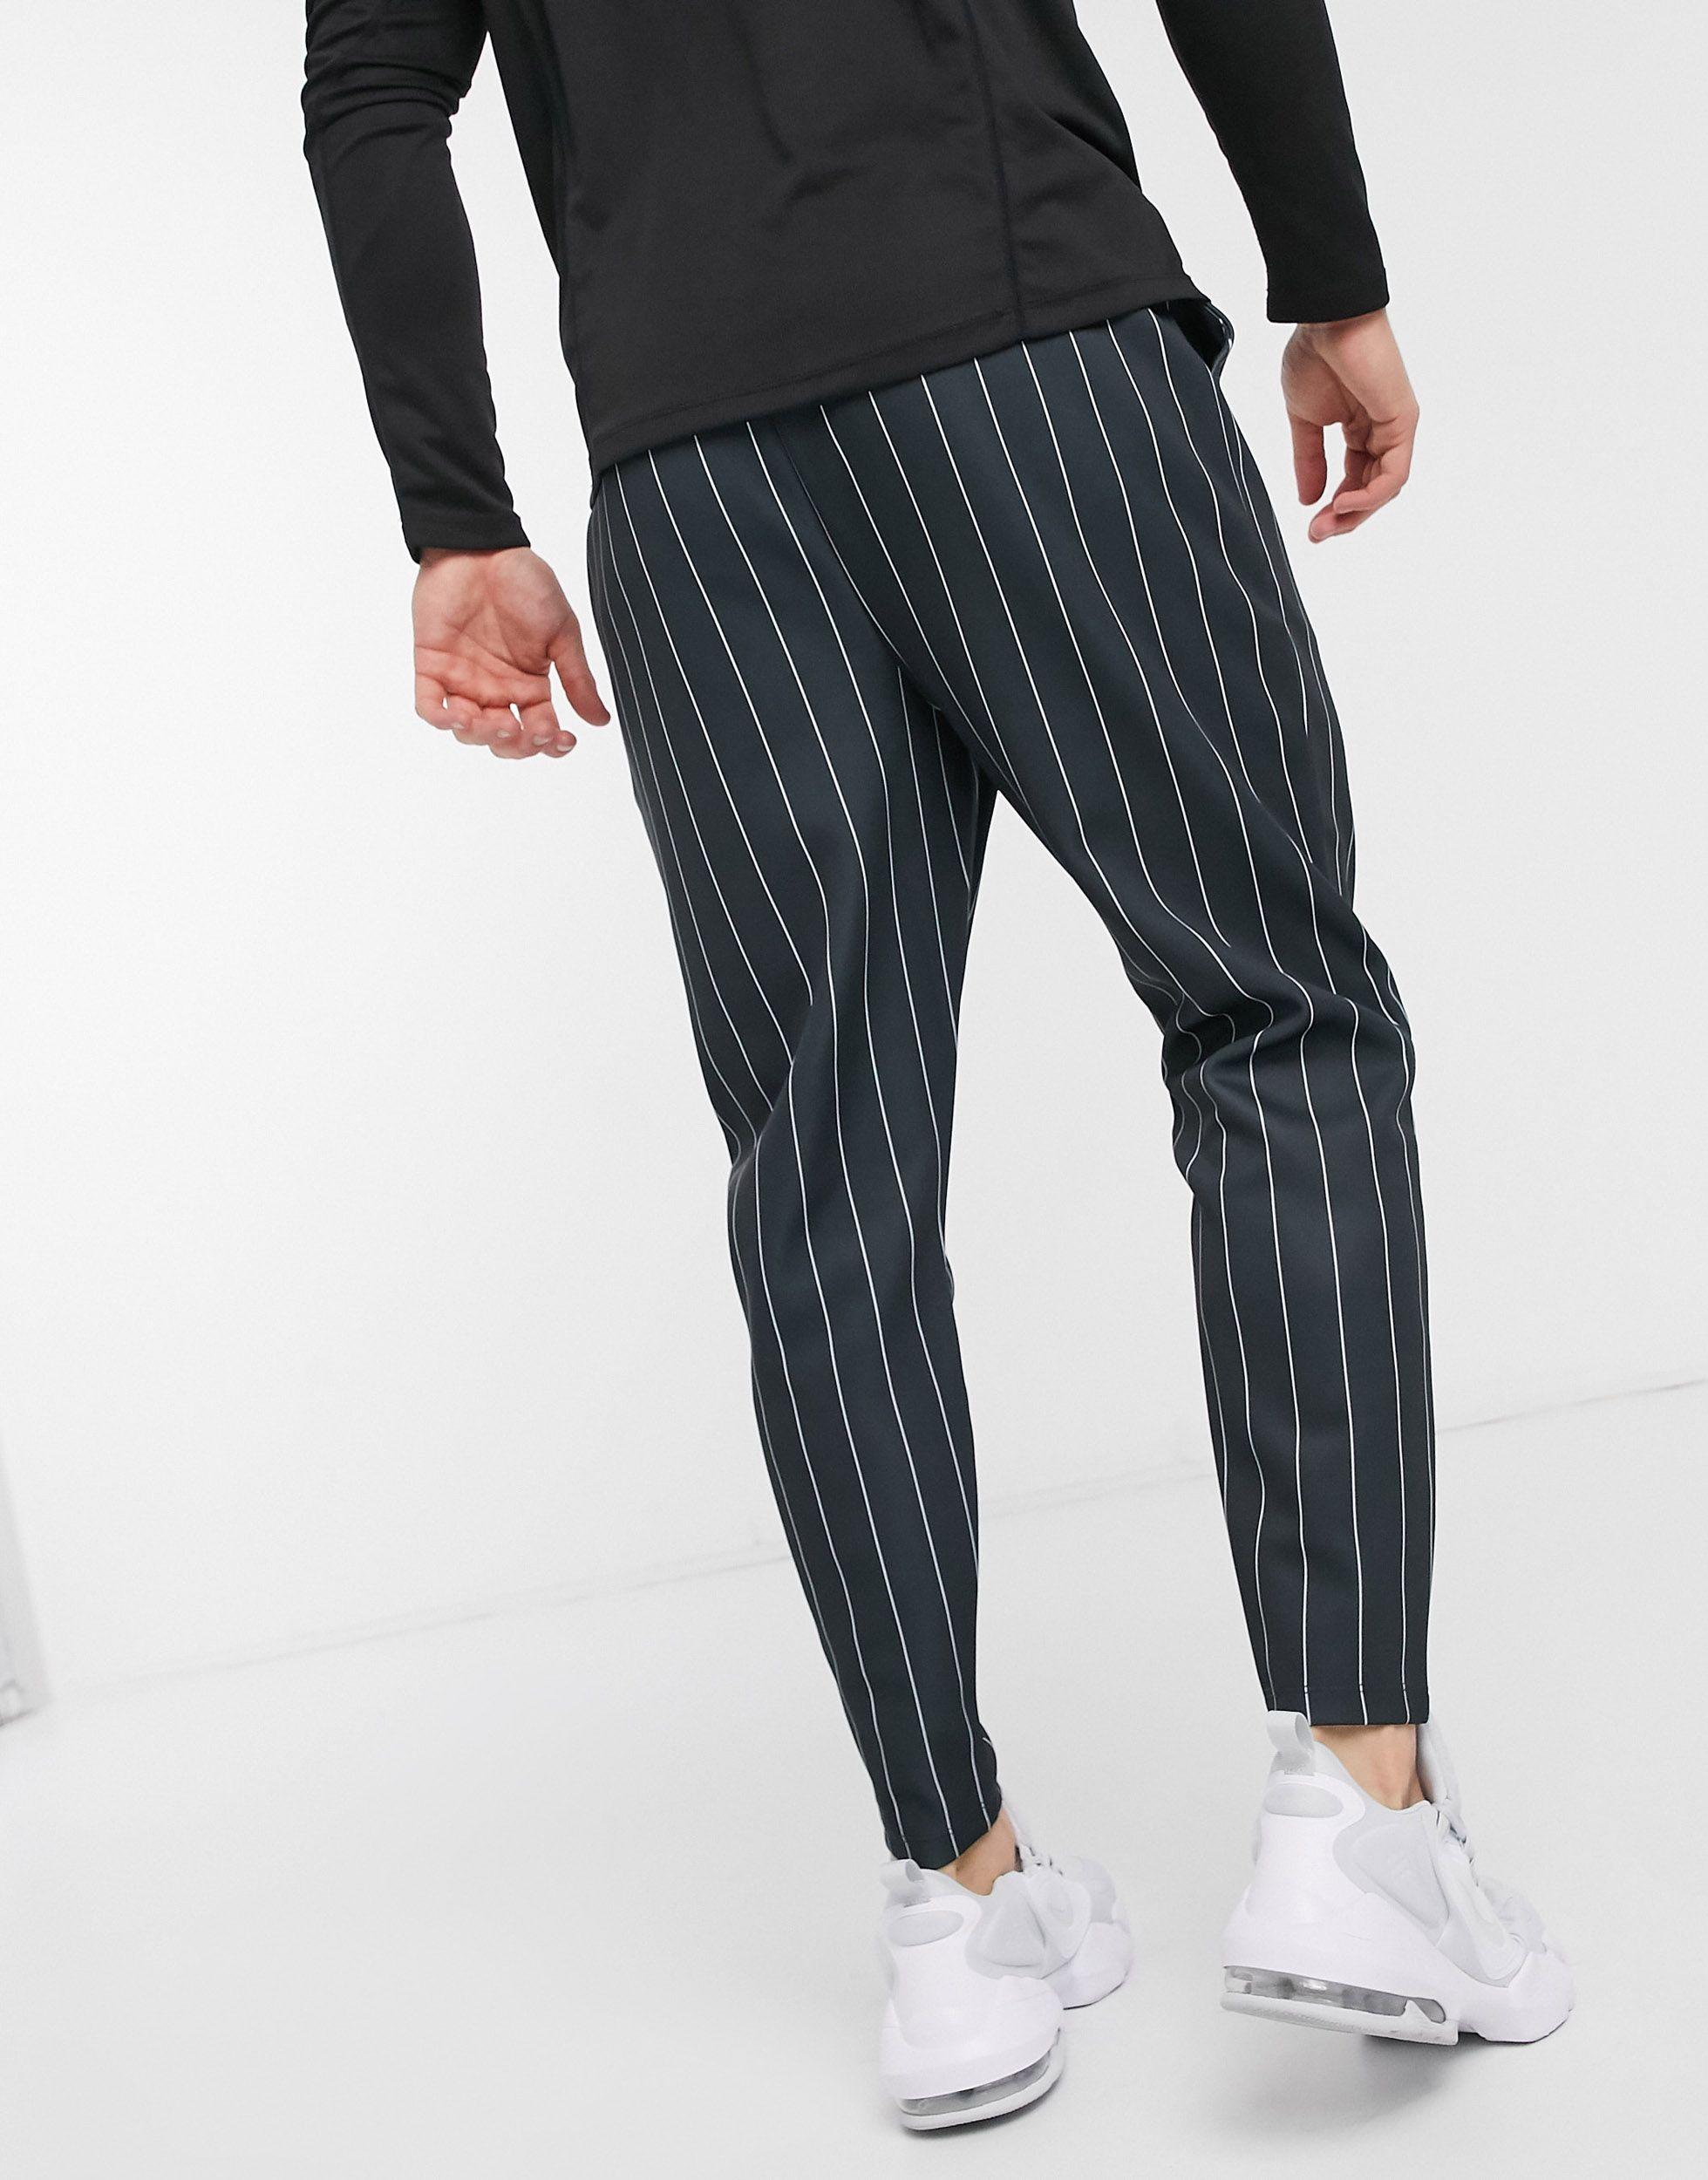 ASOS 4505 Skinny Fit Training jogger With Pinstripe in Black for Men - Lyst